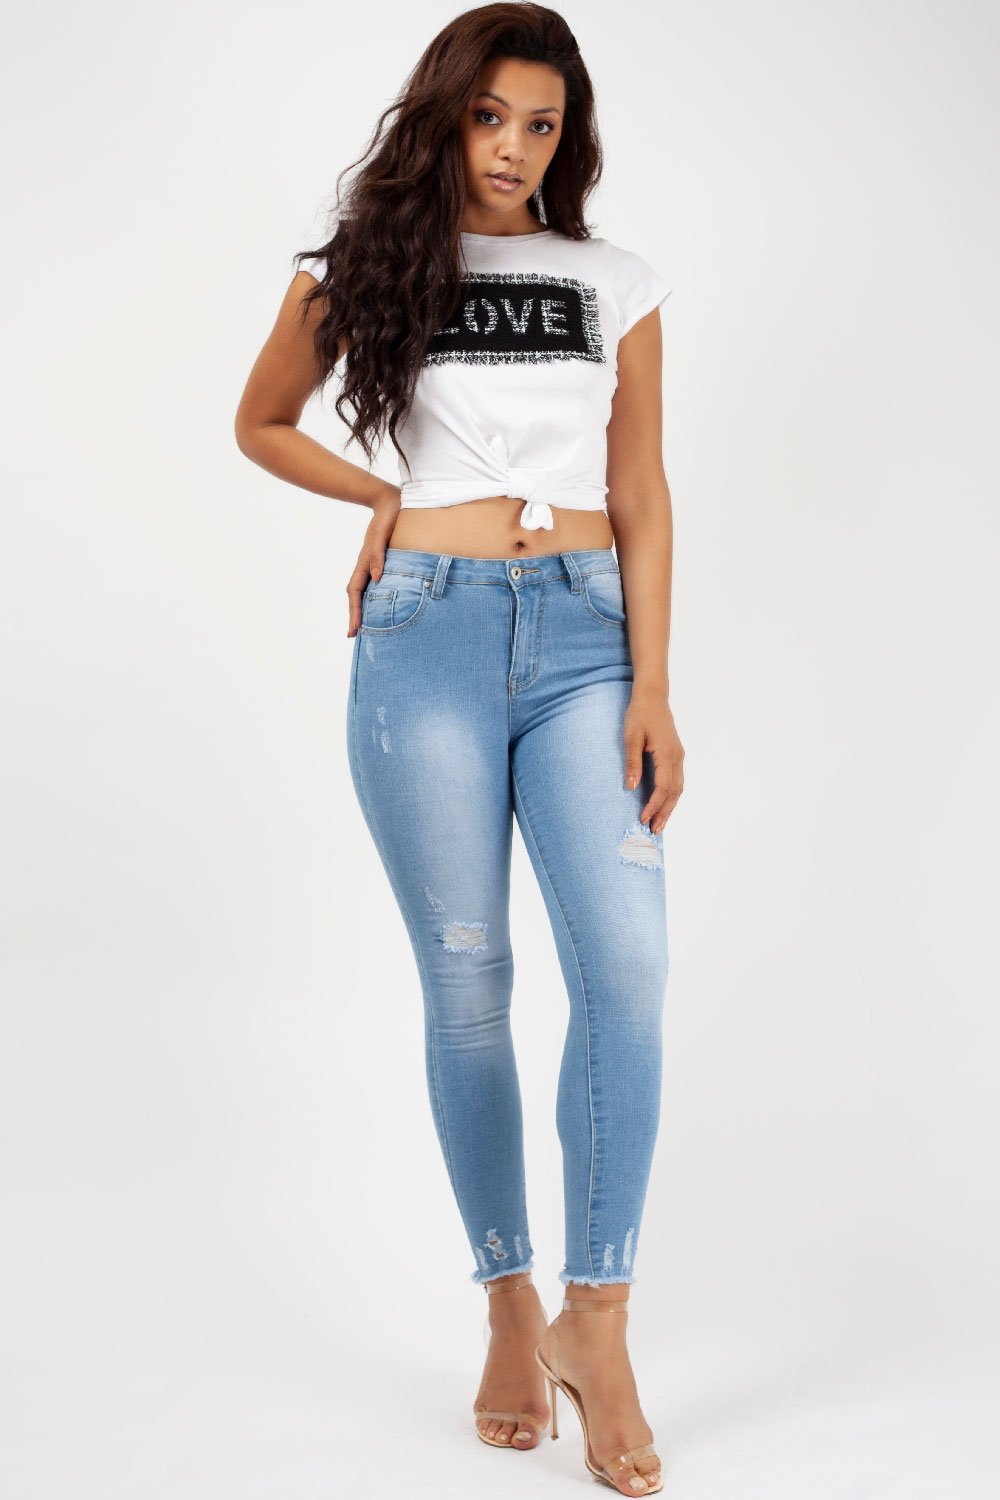 Light Blue Ripped Jeans Outfit Promotions